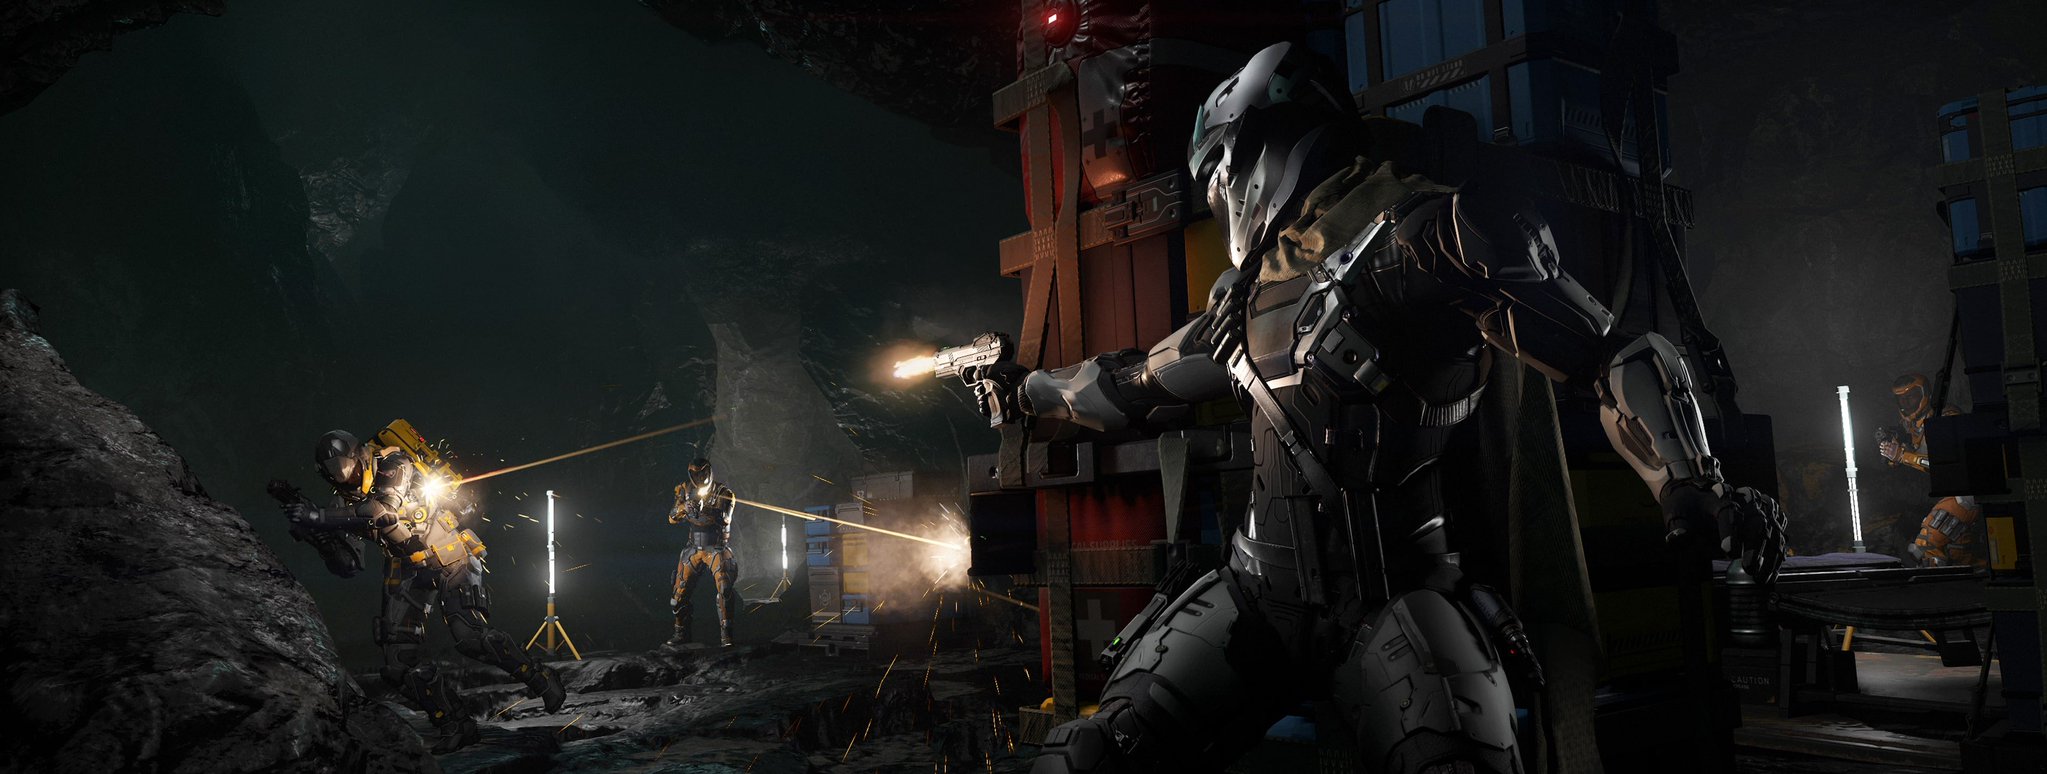 Get your first look at Star Citizen's FPS gameplay